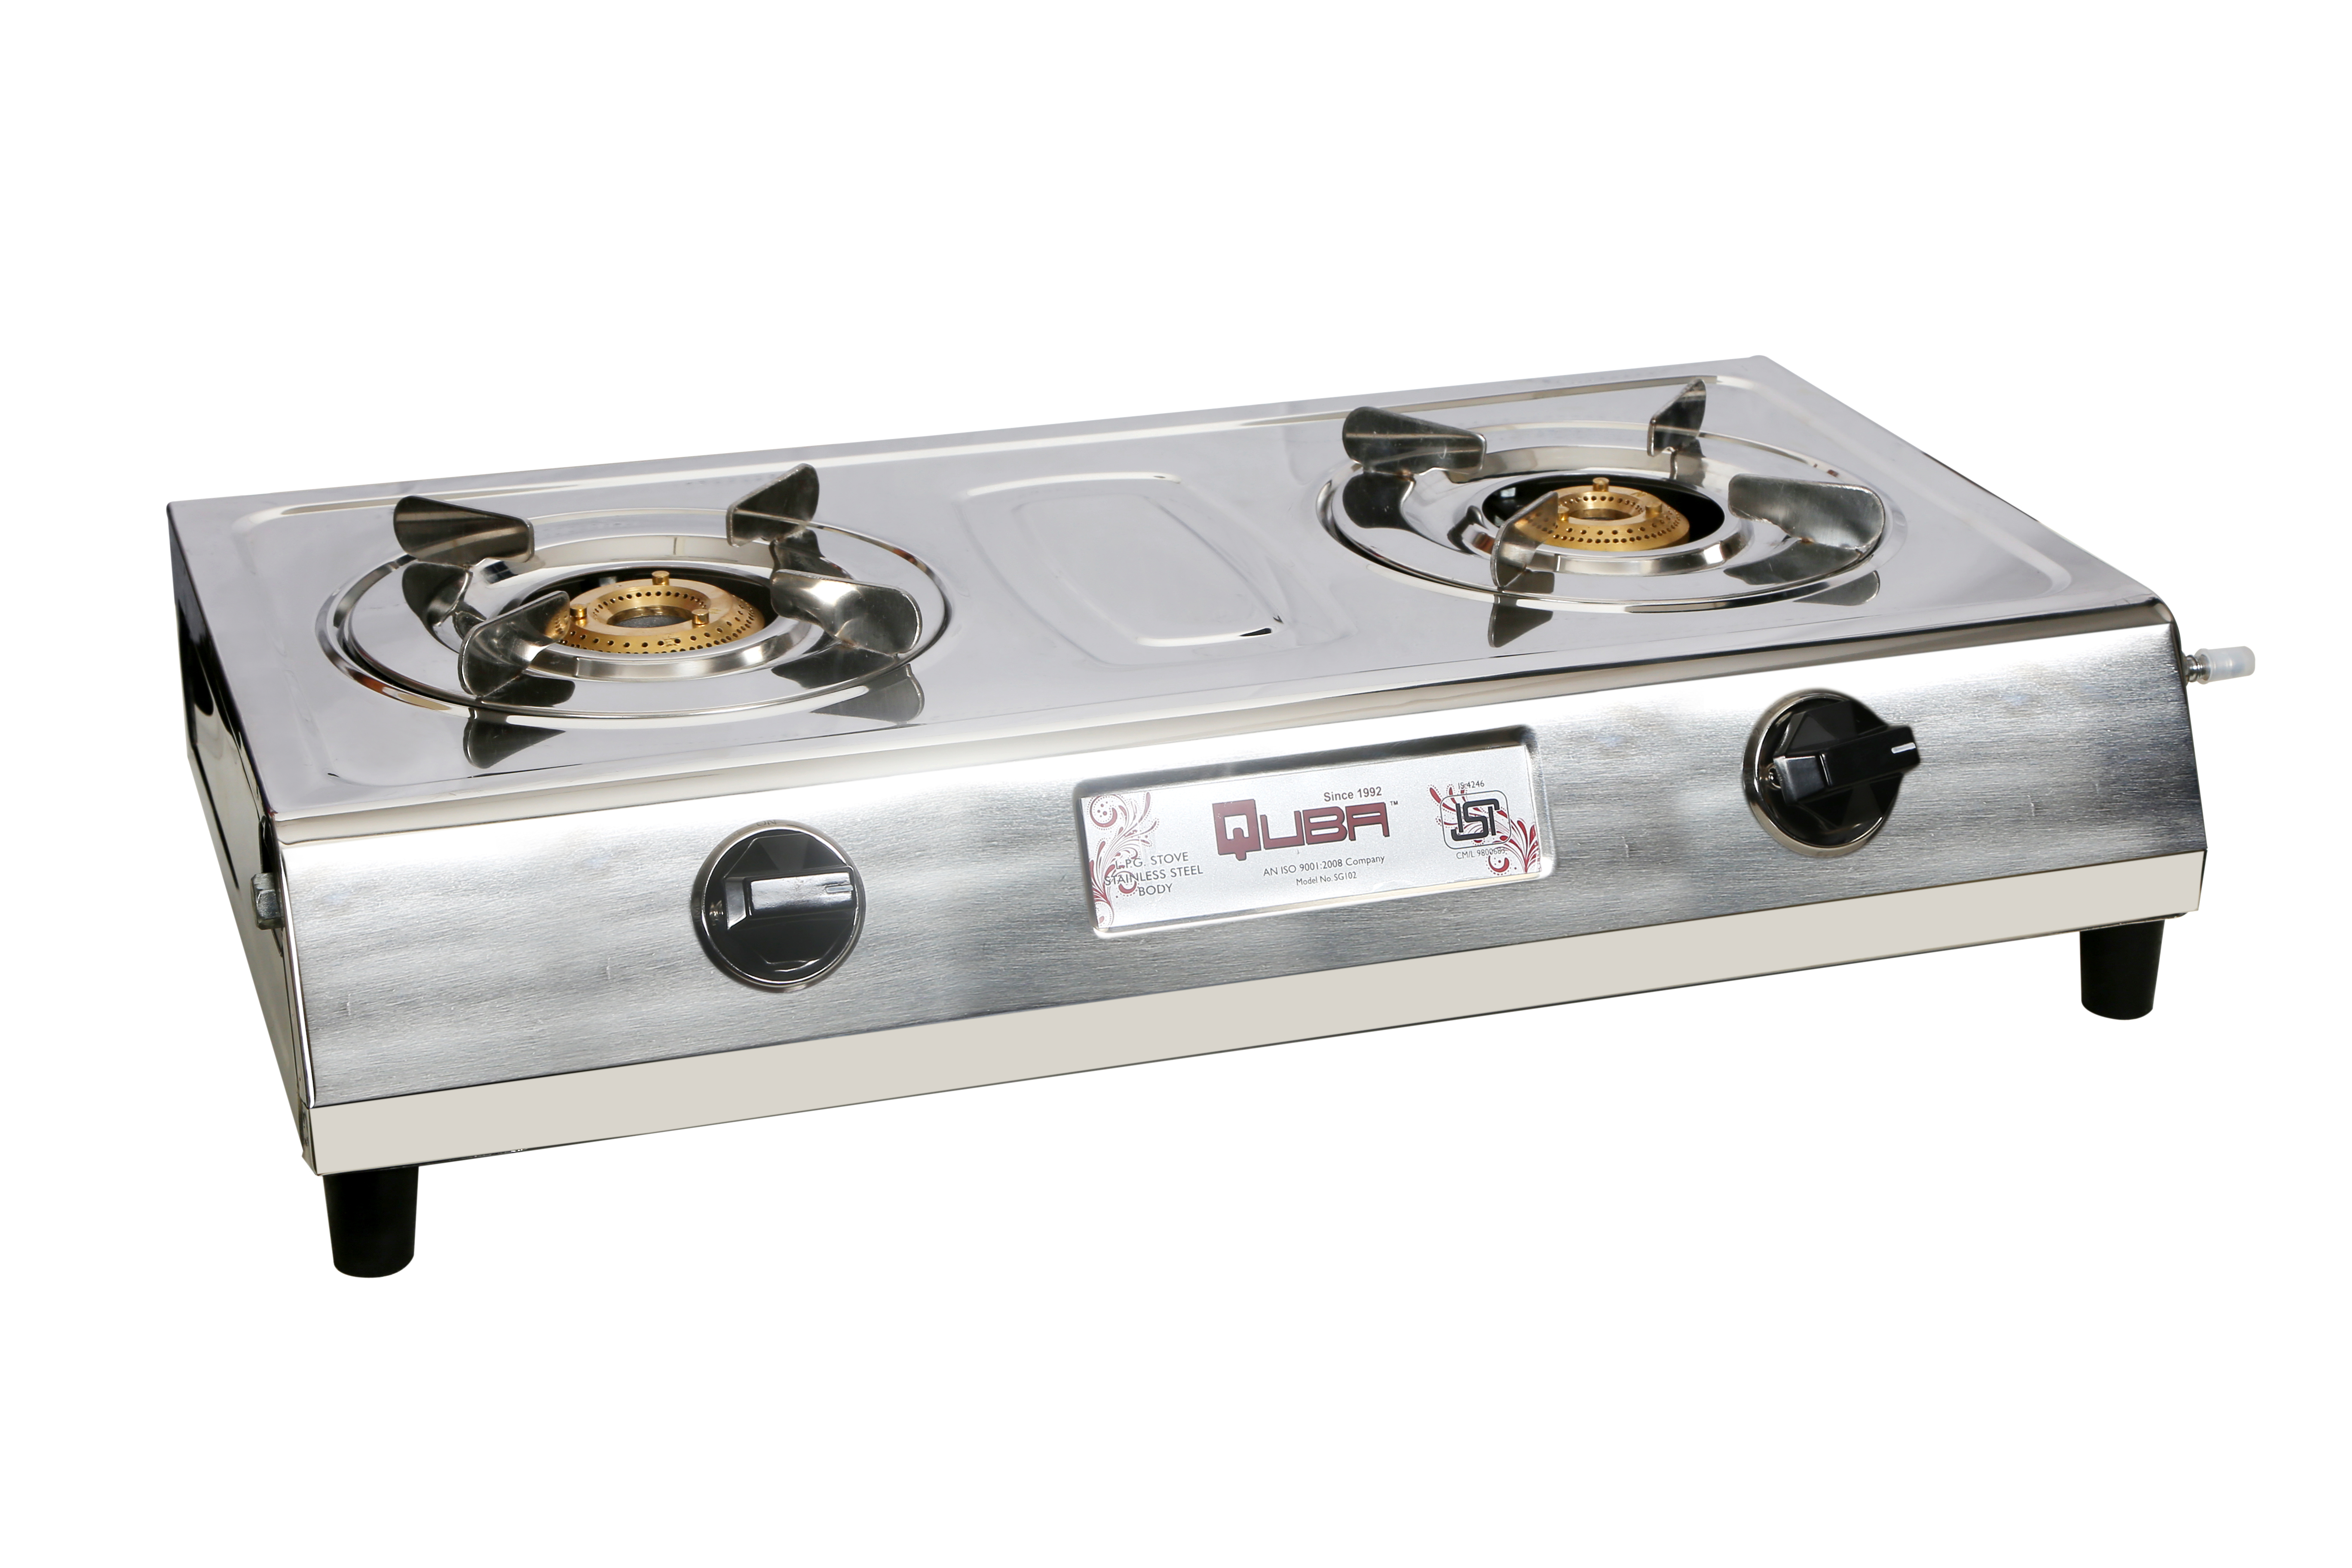 2 BURNERS  STAINLESS PAN SUPPORT BURNER GAS STOVE